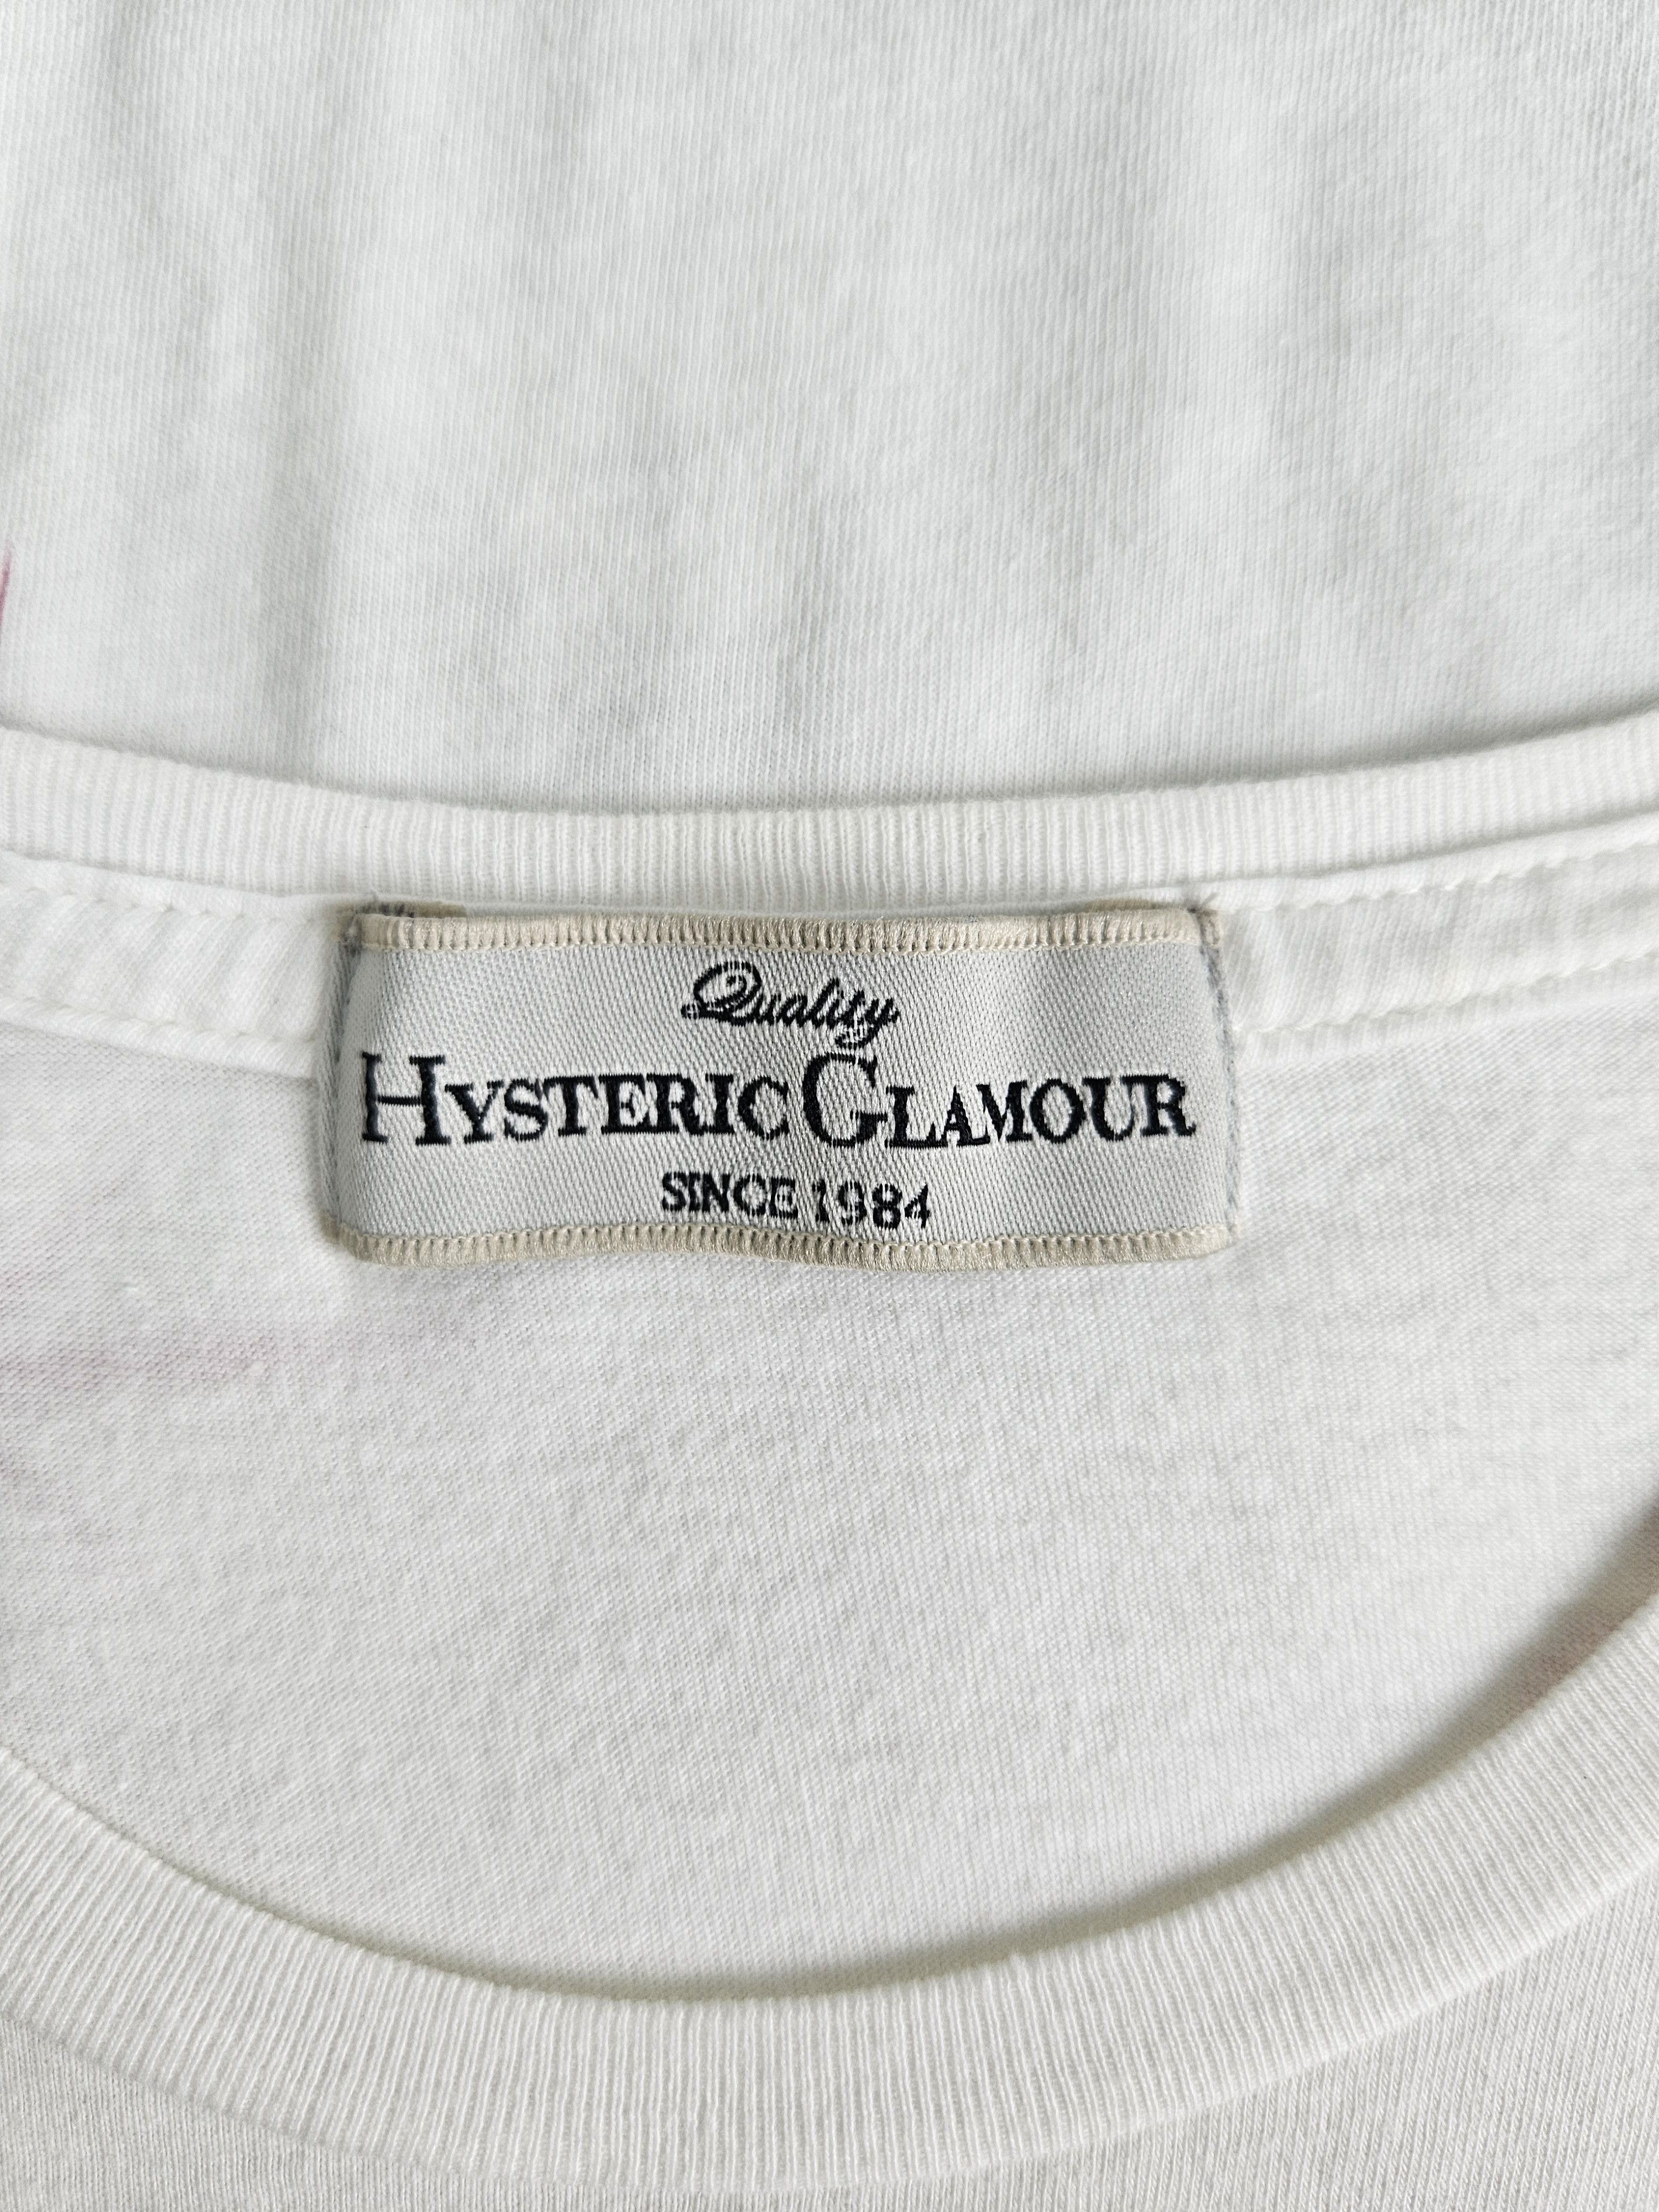 Hysteric Glamour shirt - 4